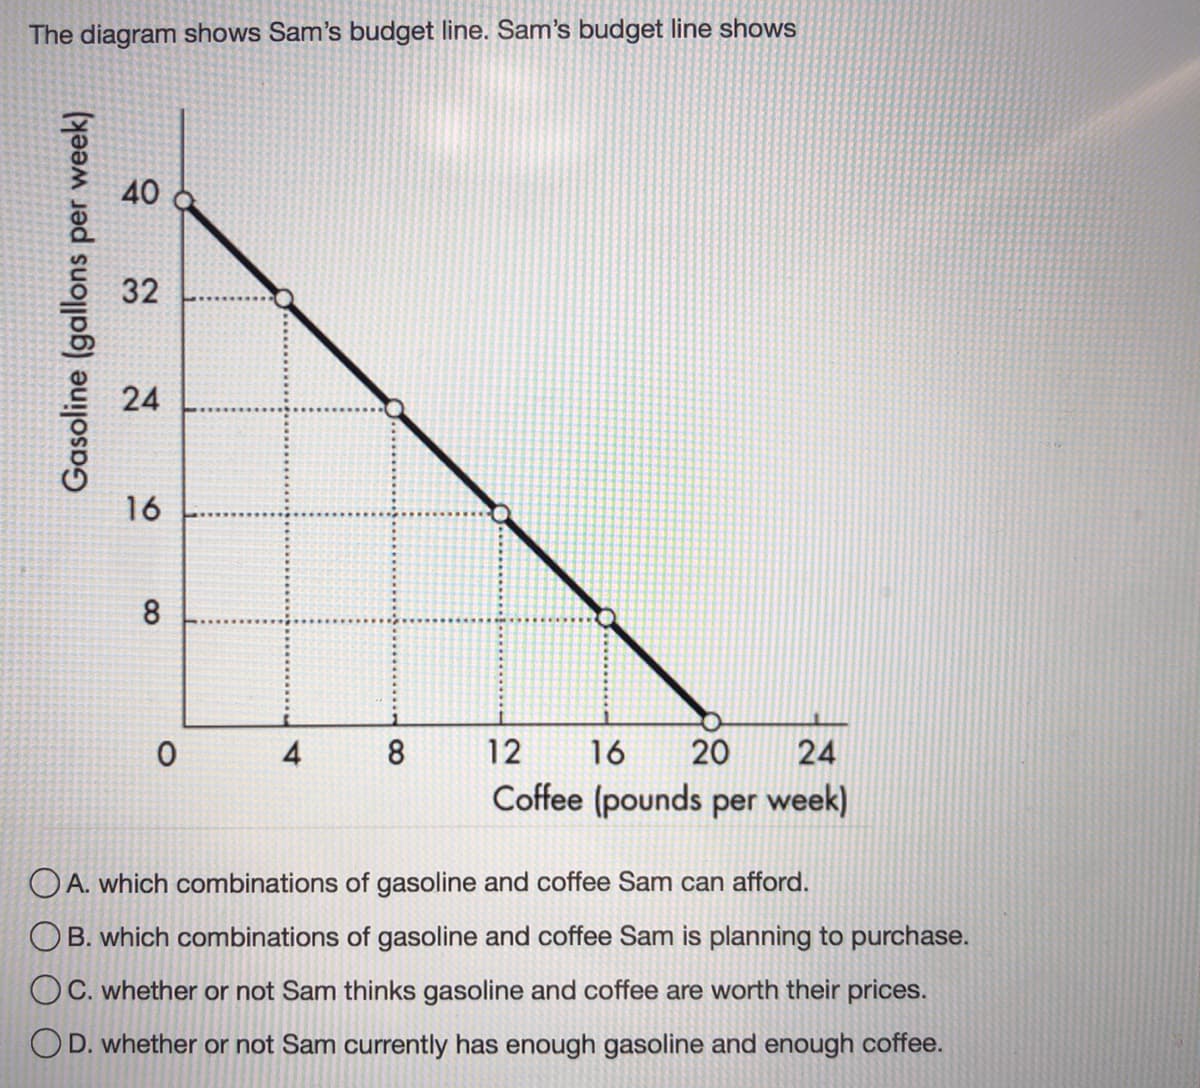 The diagram shows Sam's budget line. Sam's budget line shows
40
16
4
8.
12
16
20
24
Coffee (pounds per week)
O A. which combinations of gasoline and coffee Sam can afford.
B. which combinations of gasoline and coffee Sam is planning to purchase.
OC. whether or not Sam thinks gasoline and coffee are worth their prices.
OD. whether or not Sam currently has enough gasoline and enough coffee.
32
24
Gasoline (gallons per week)
